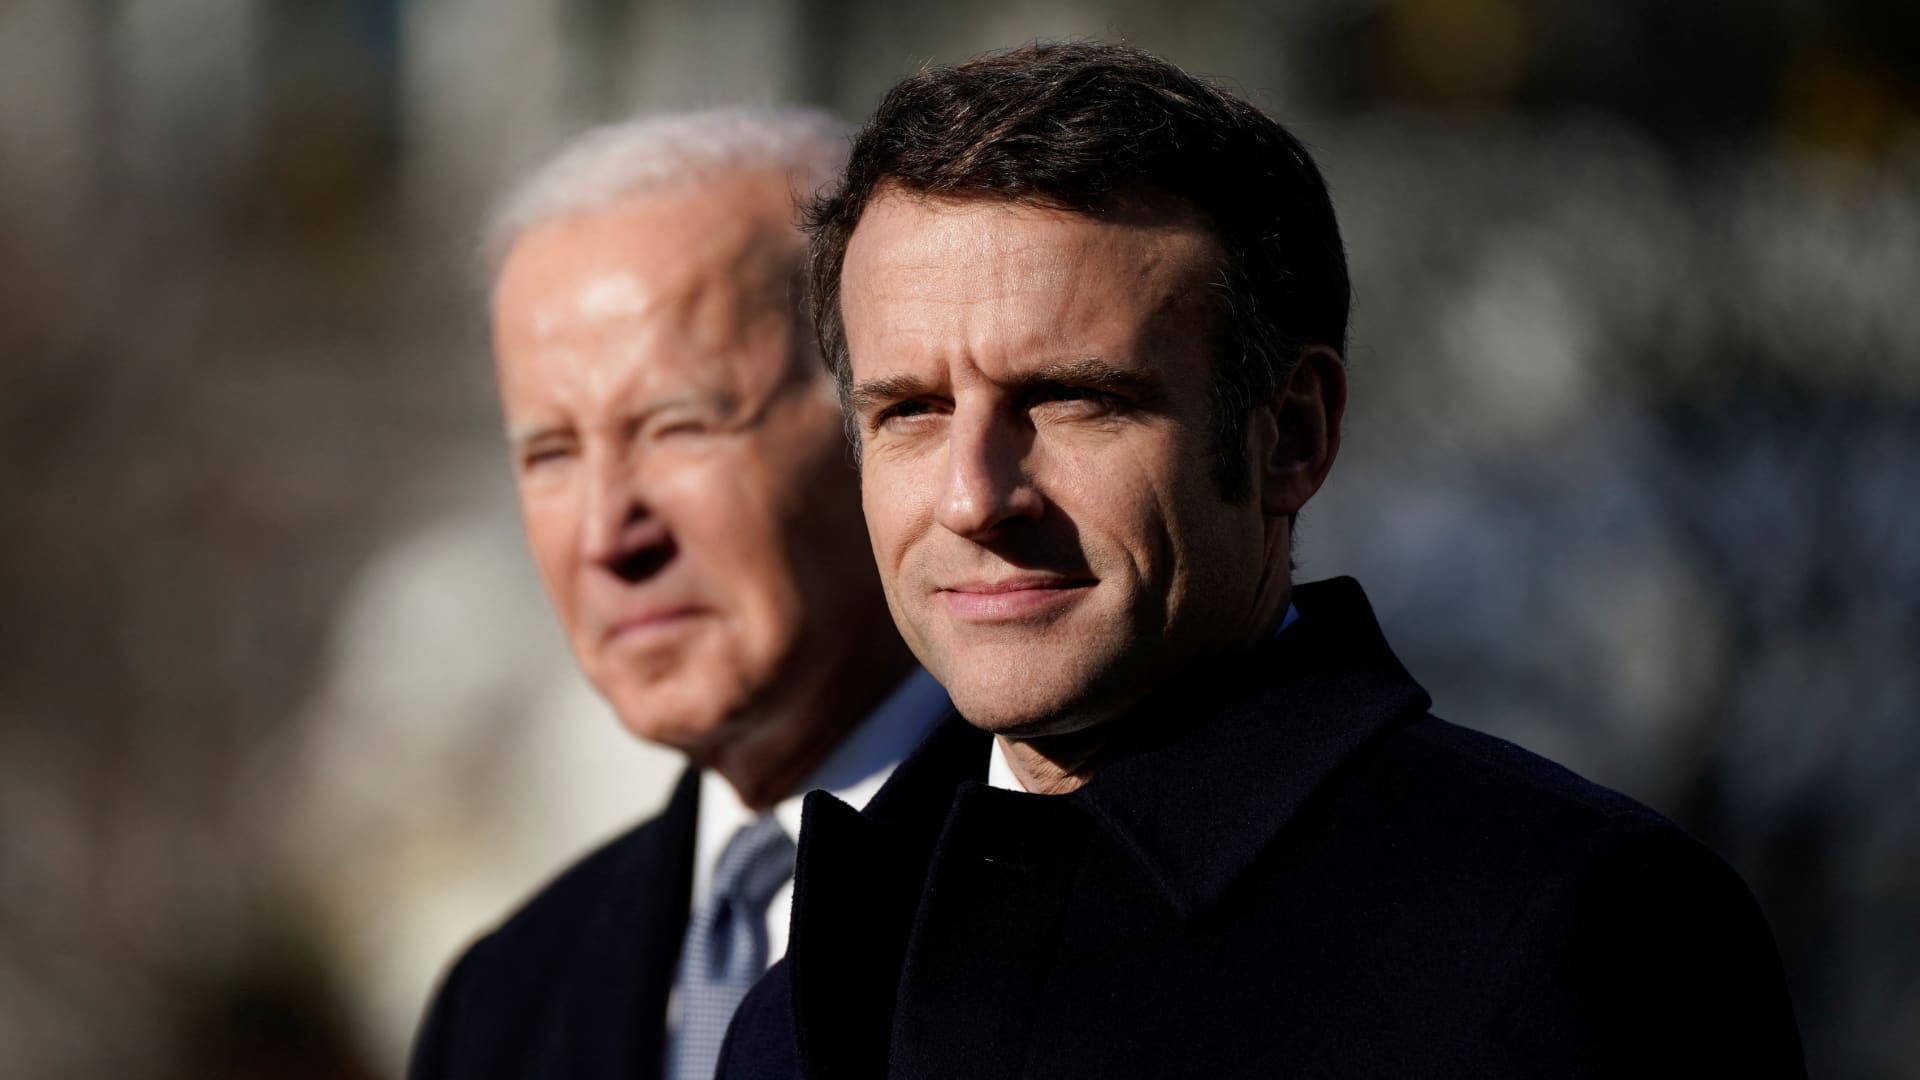 Biden, Macron to discuss Israel and Ukraine in pomp-filled state visit